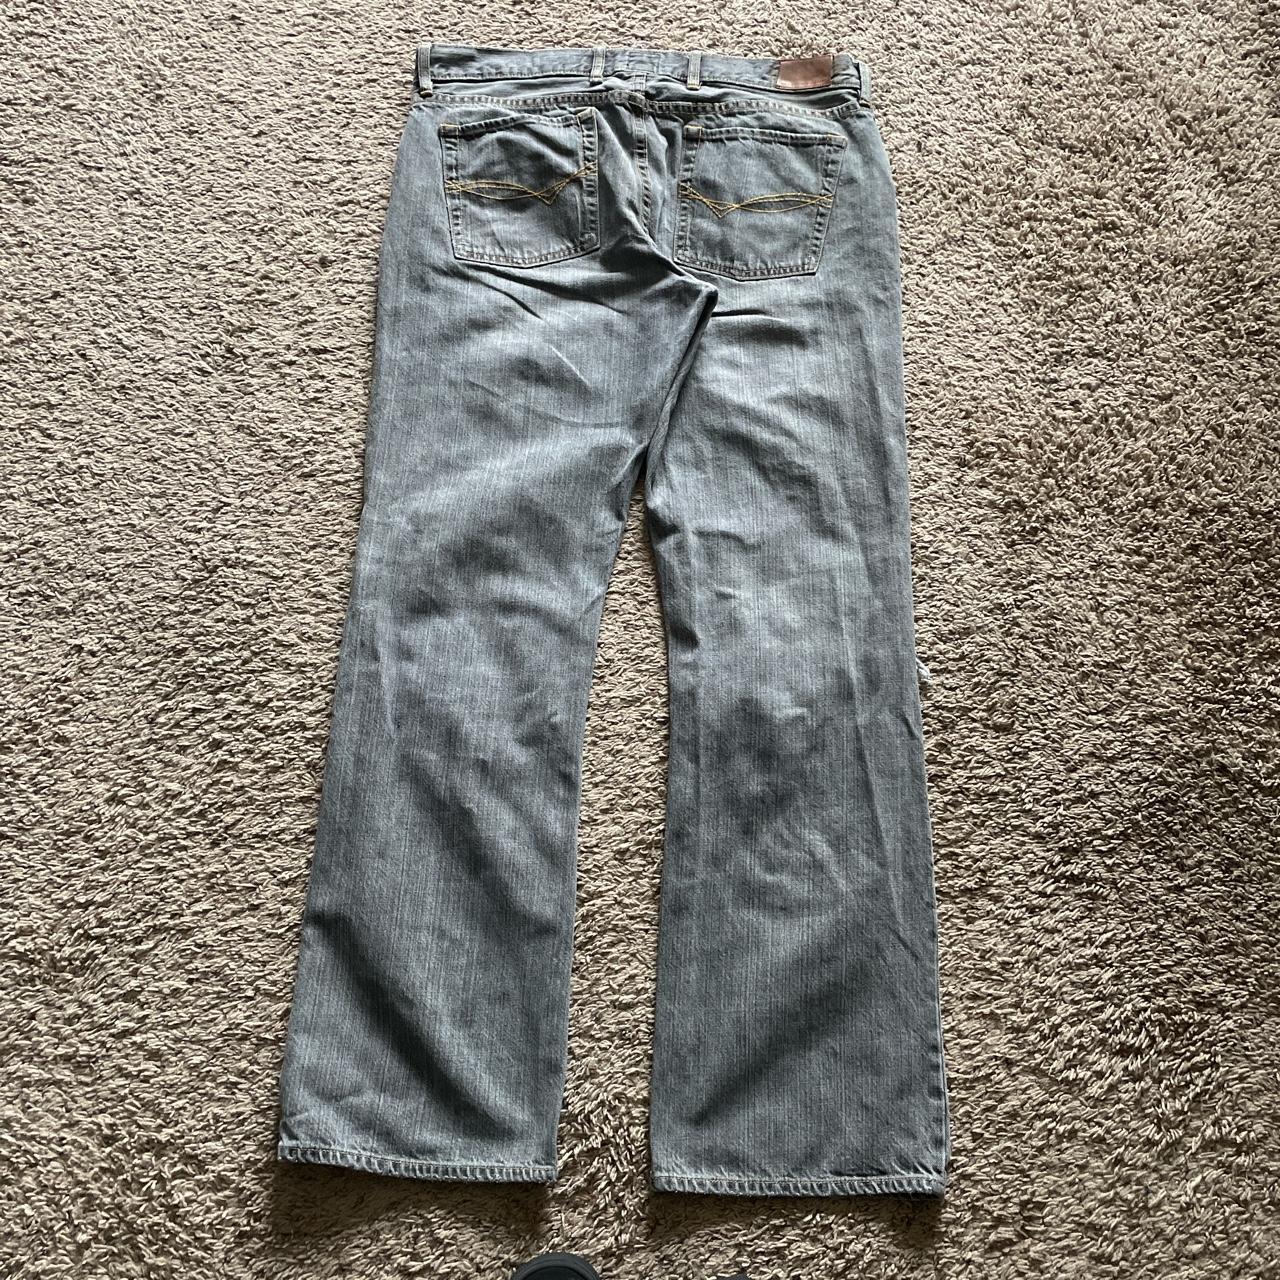 Men's Grey and Silver Jeans | Depop